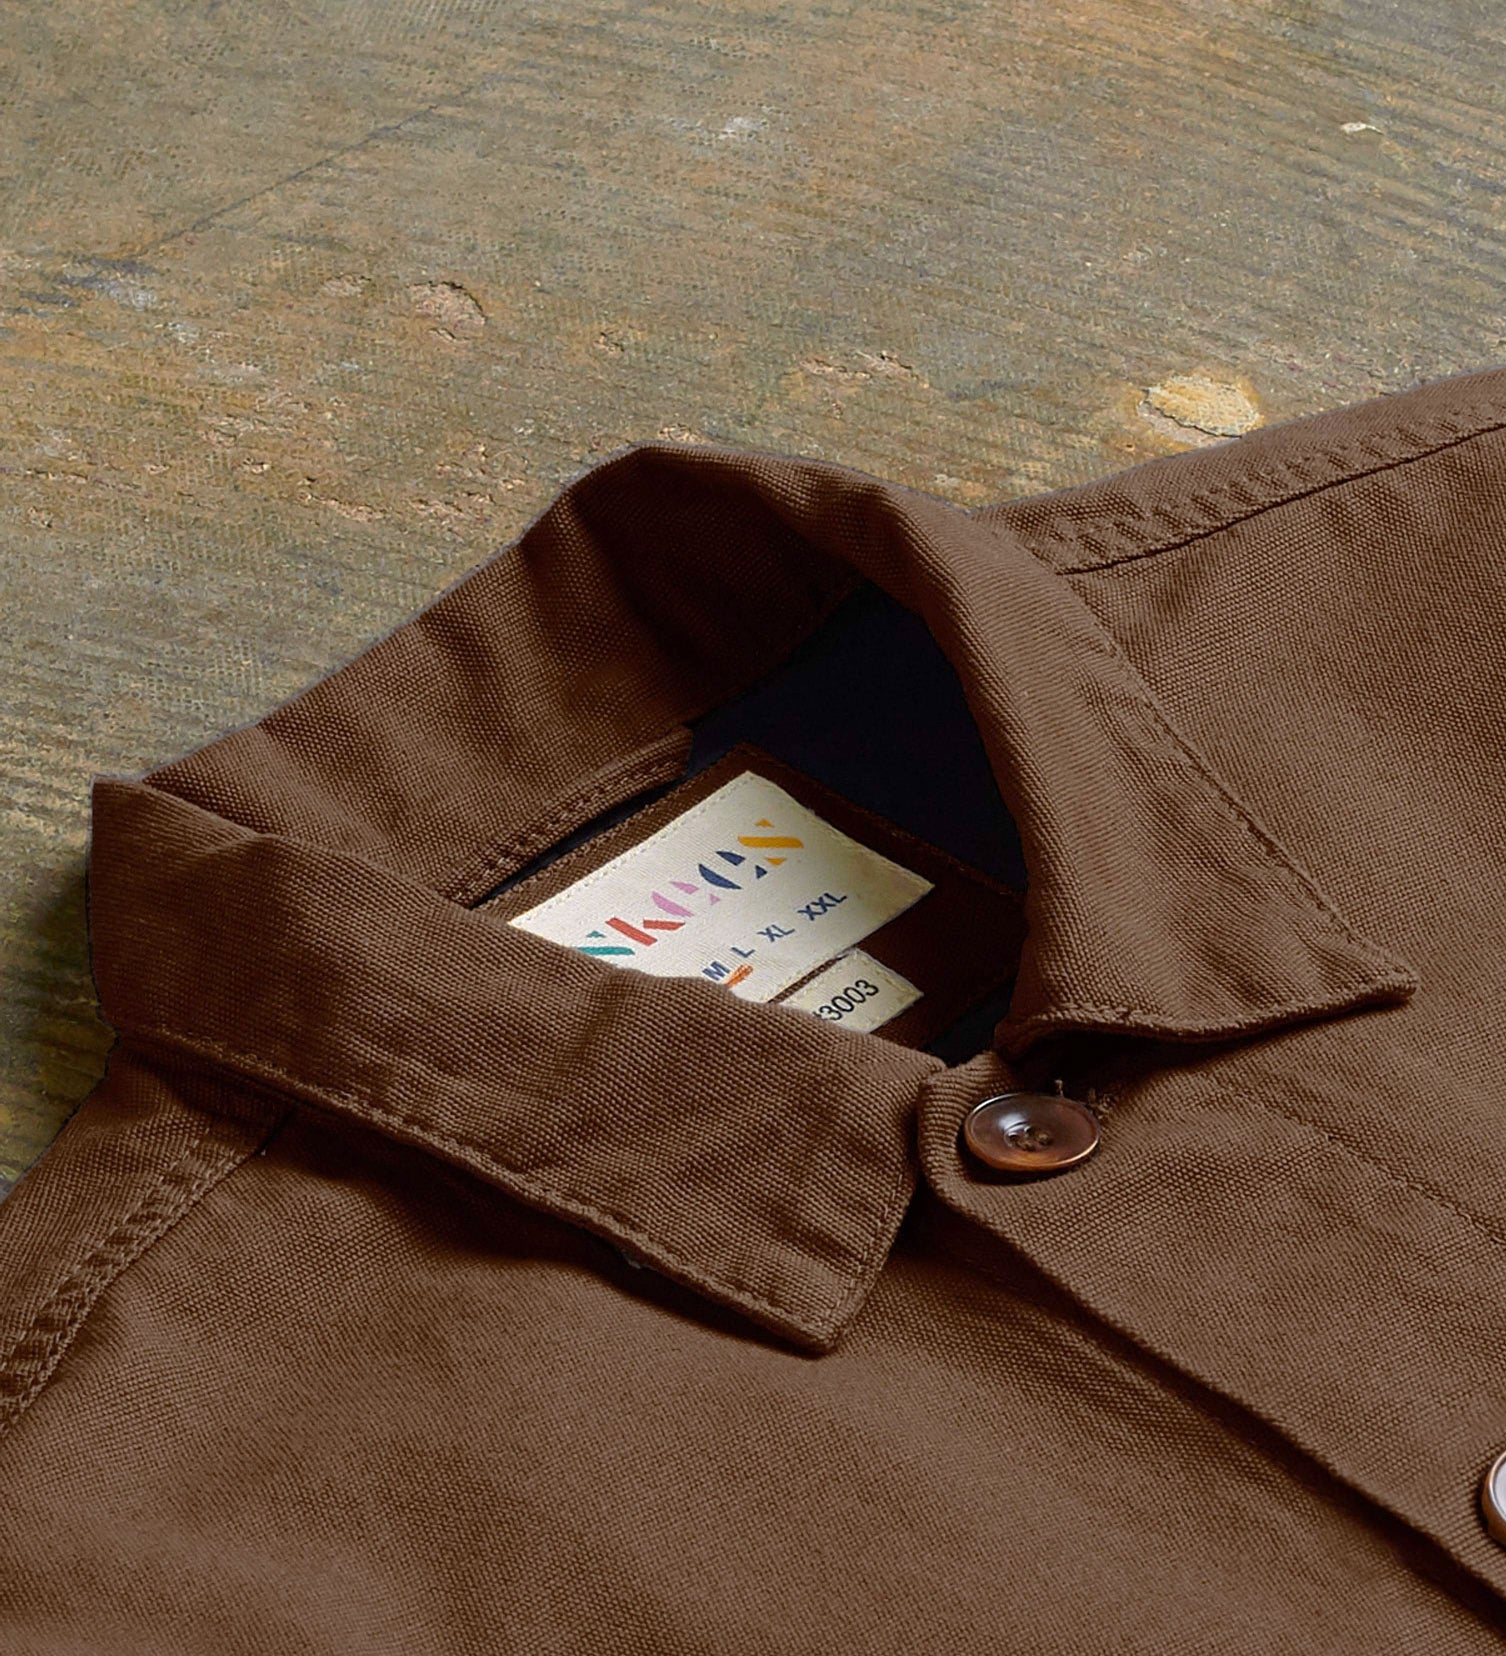 Angled flat view of the collar of the #3003 Uskees button-down work shirt in brown, showing weave of organic cotton and Uskees branding label